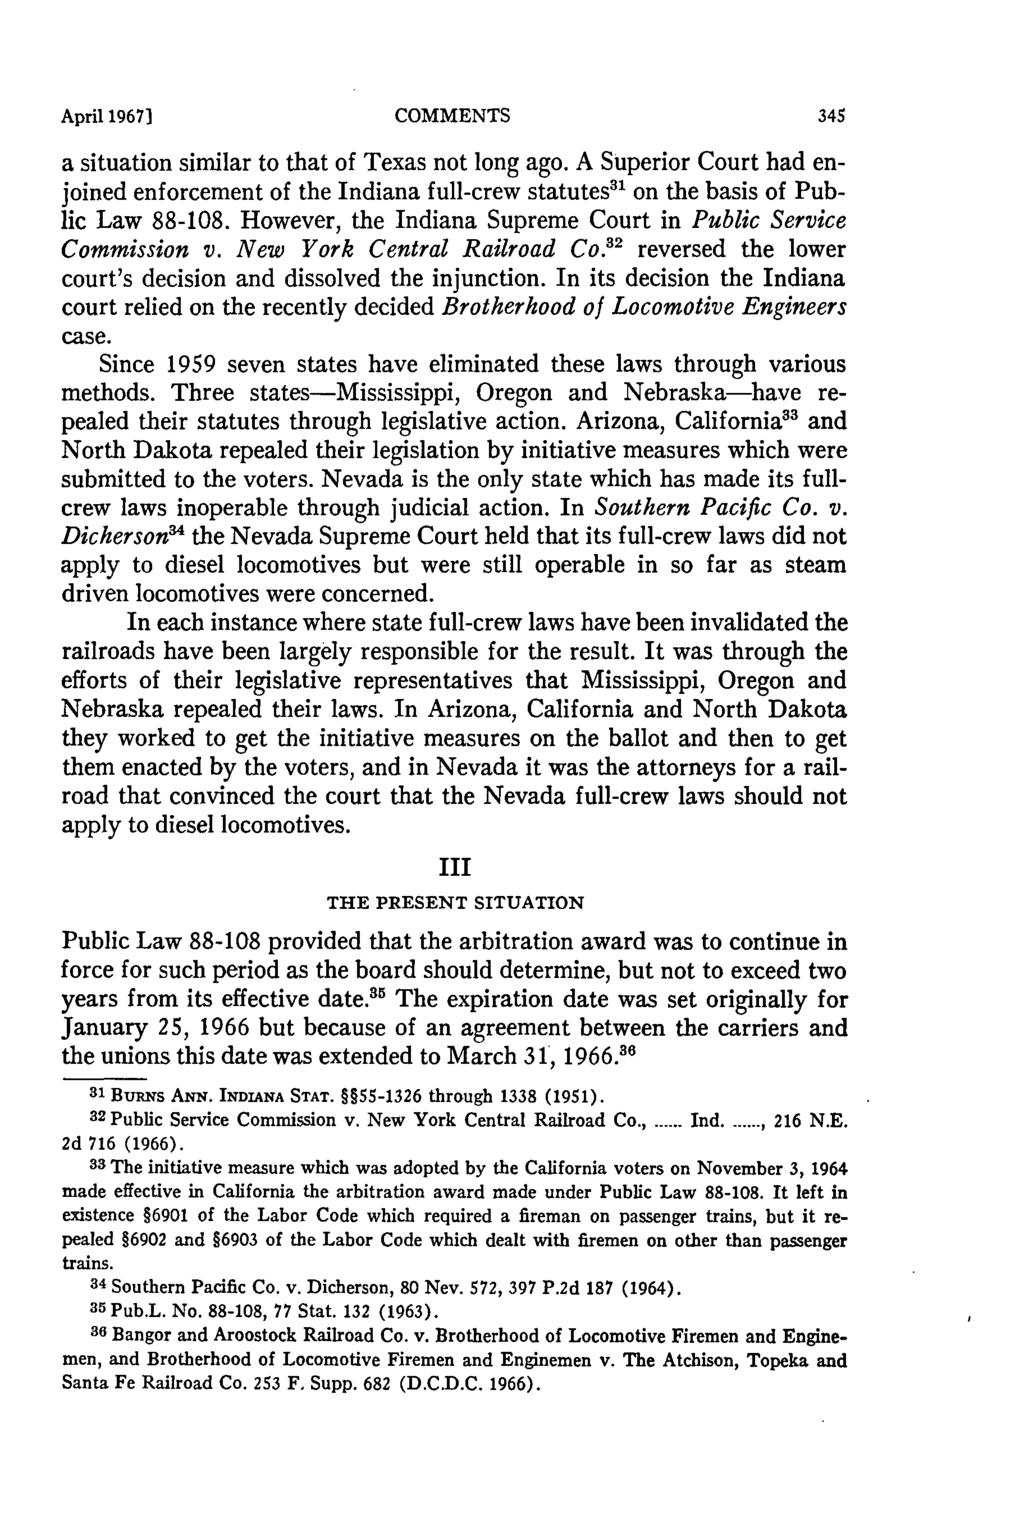 April 1967] COMMENTS a situation similar to that of Texas not long ago. A Superior Court had enjoined enforcement of the Indiana full-crew statutes 3 on the basis of Public Law 88-108.